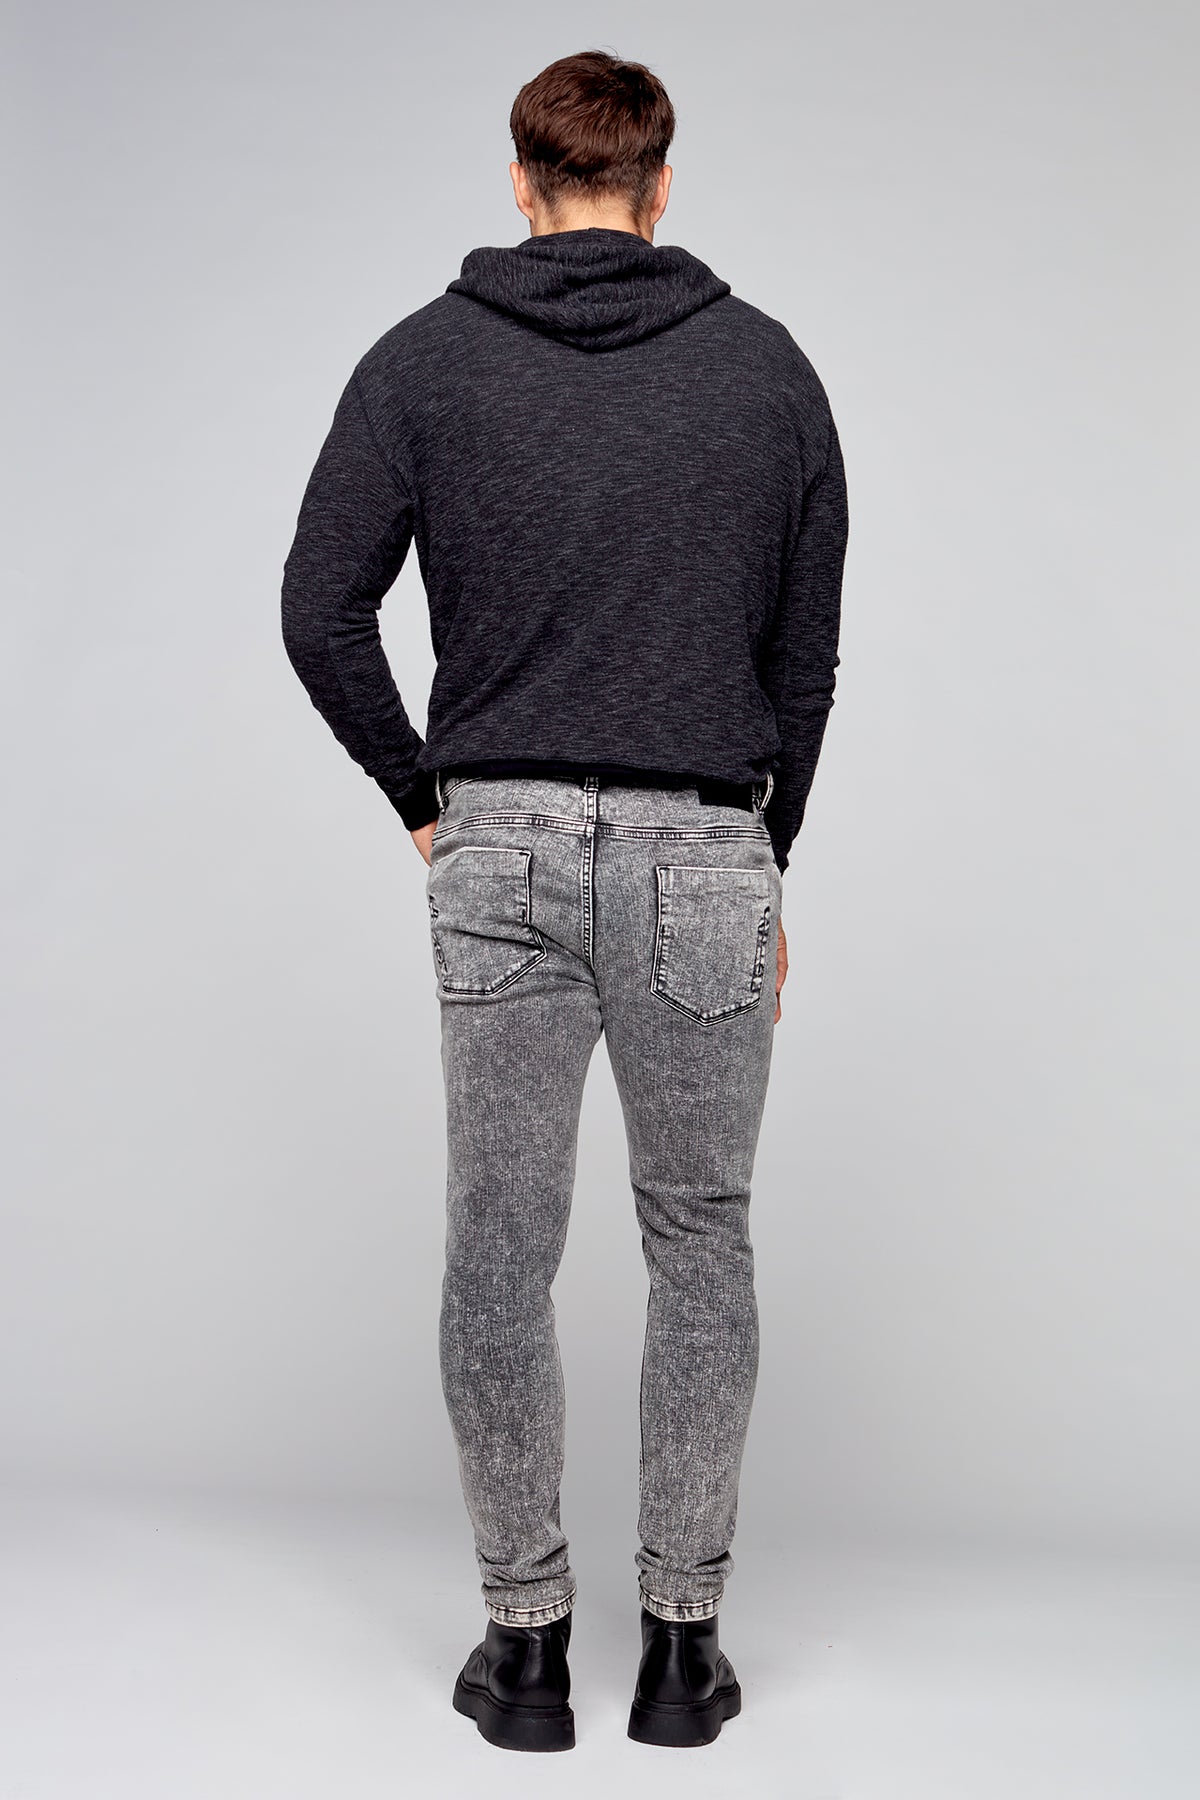 Relaxed Tapered Fit 5 Pocket Jeans - Dark Grey Acid Wash - DENIM SOCIETY™